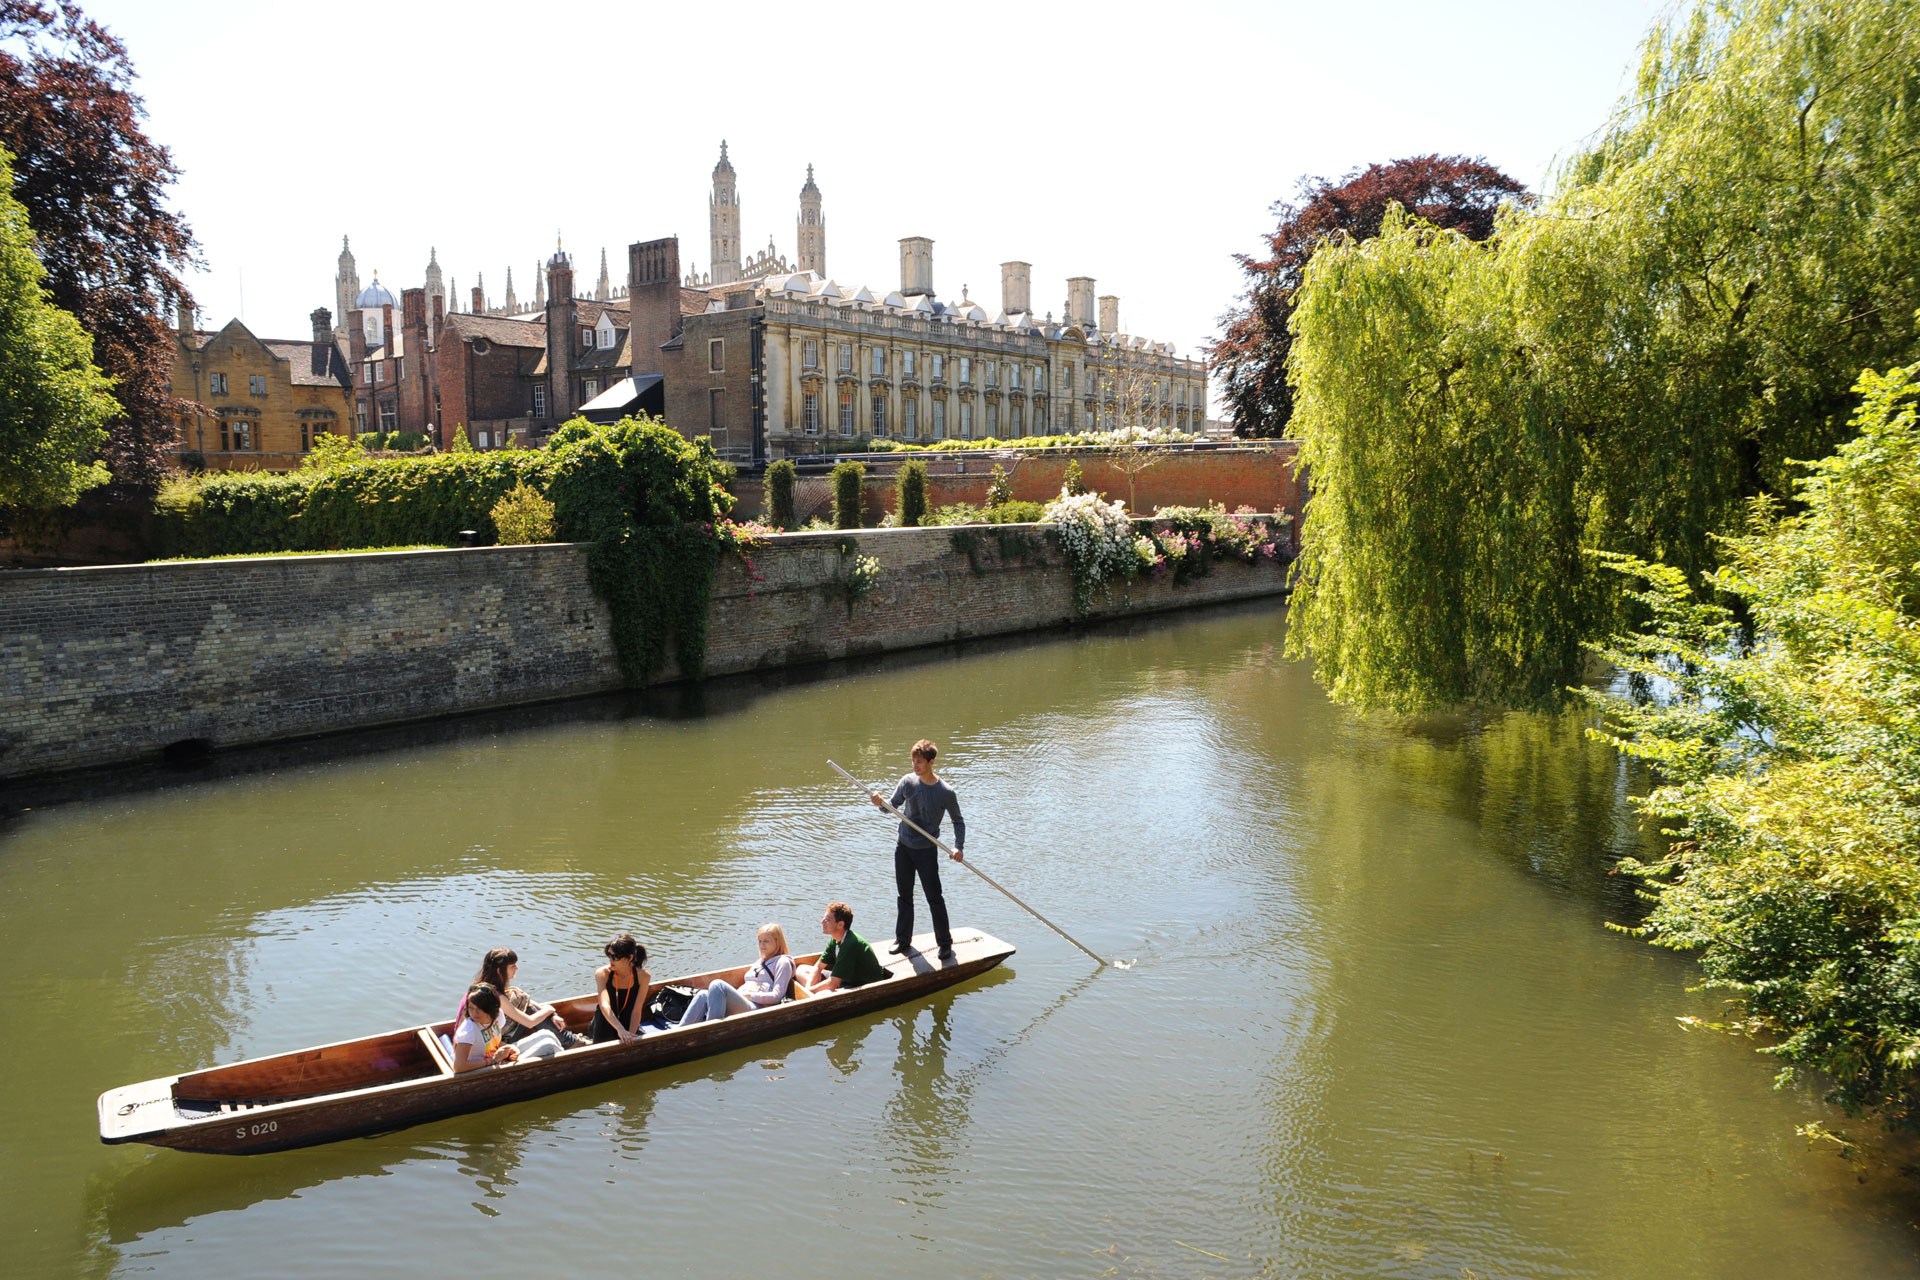 Free Download Cambridge Computer Wallpaper on our website with great care. 